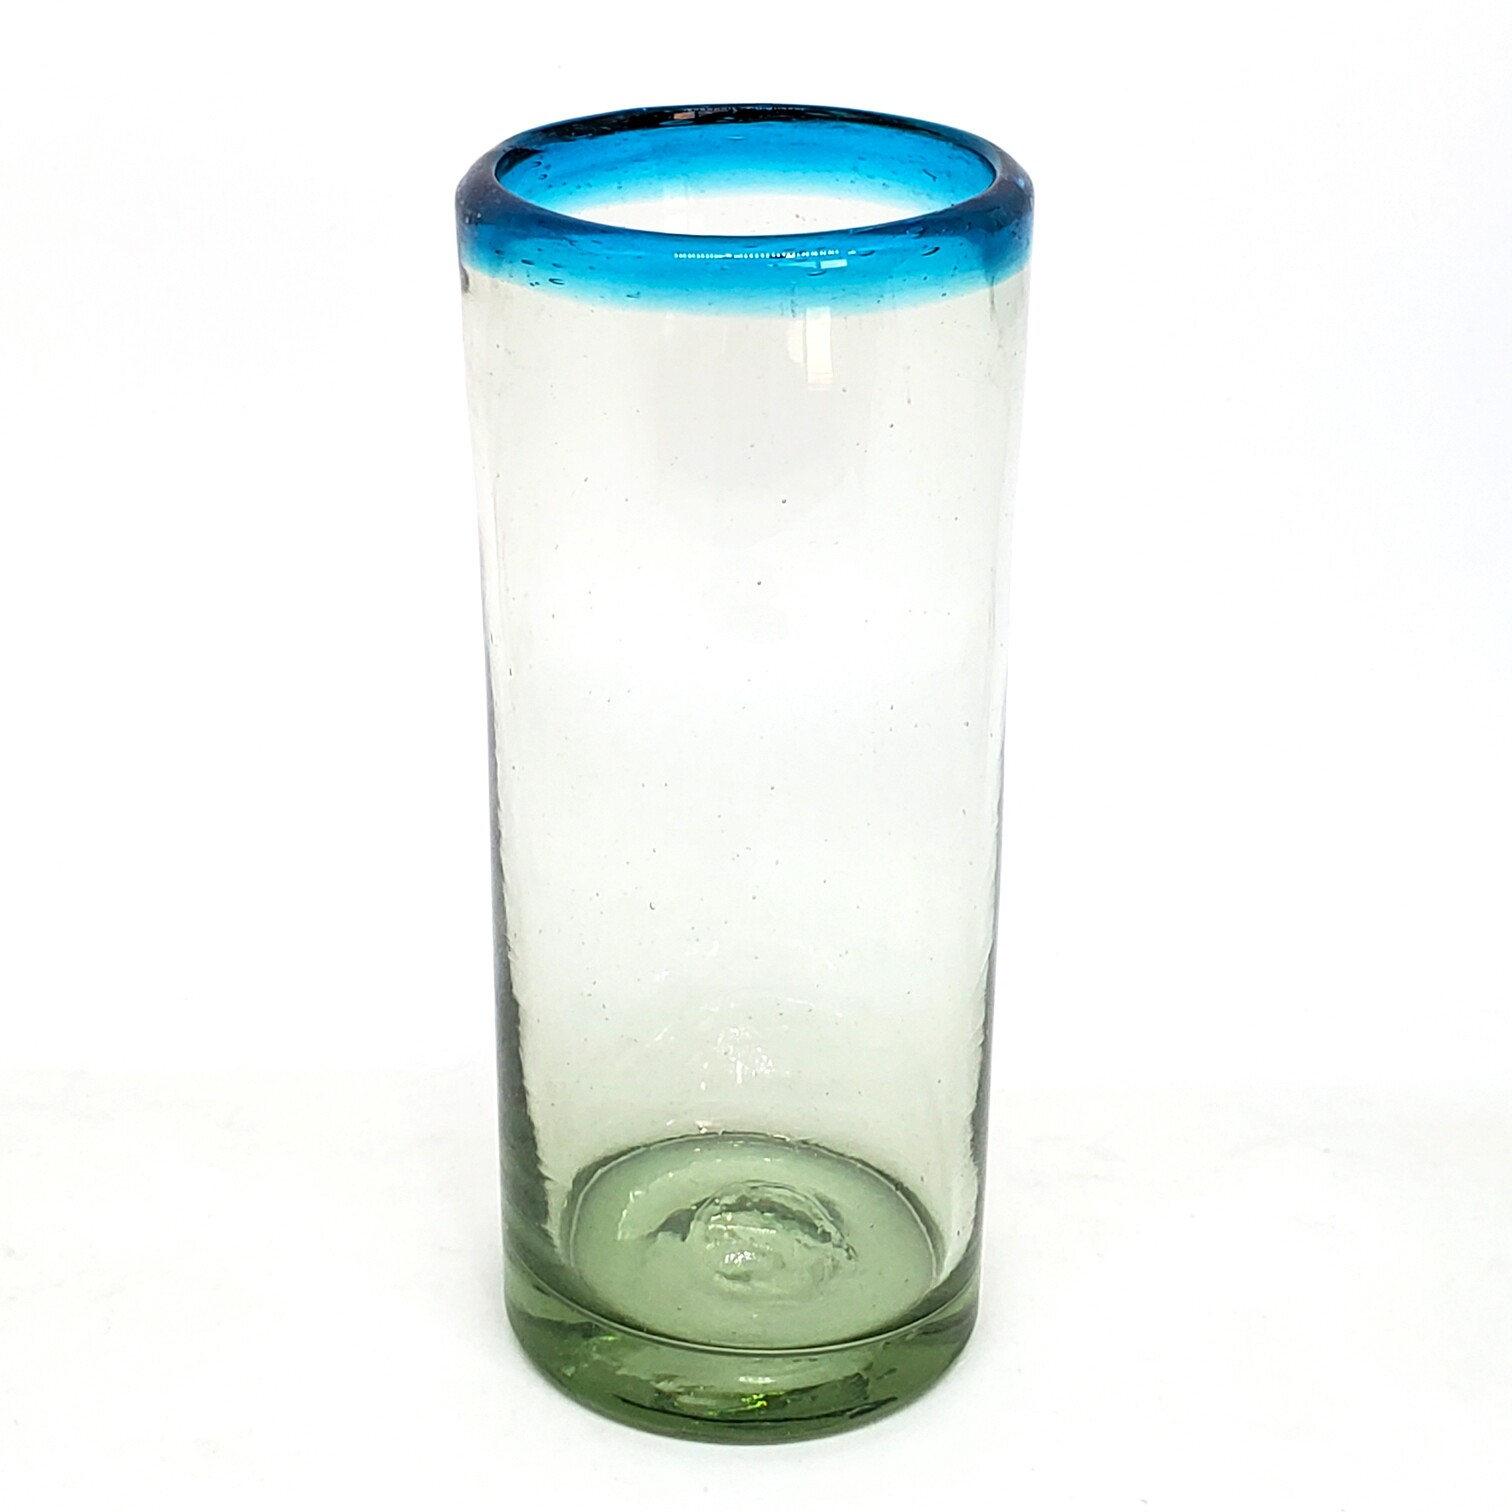 Sale Items / Aqua Blue Rim 15 oz Highball Glasses  / Enjoy mojitos, cubas or any other refreshing drink with these classy highball glasses.